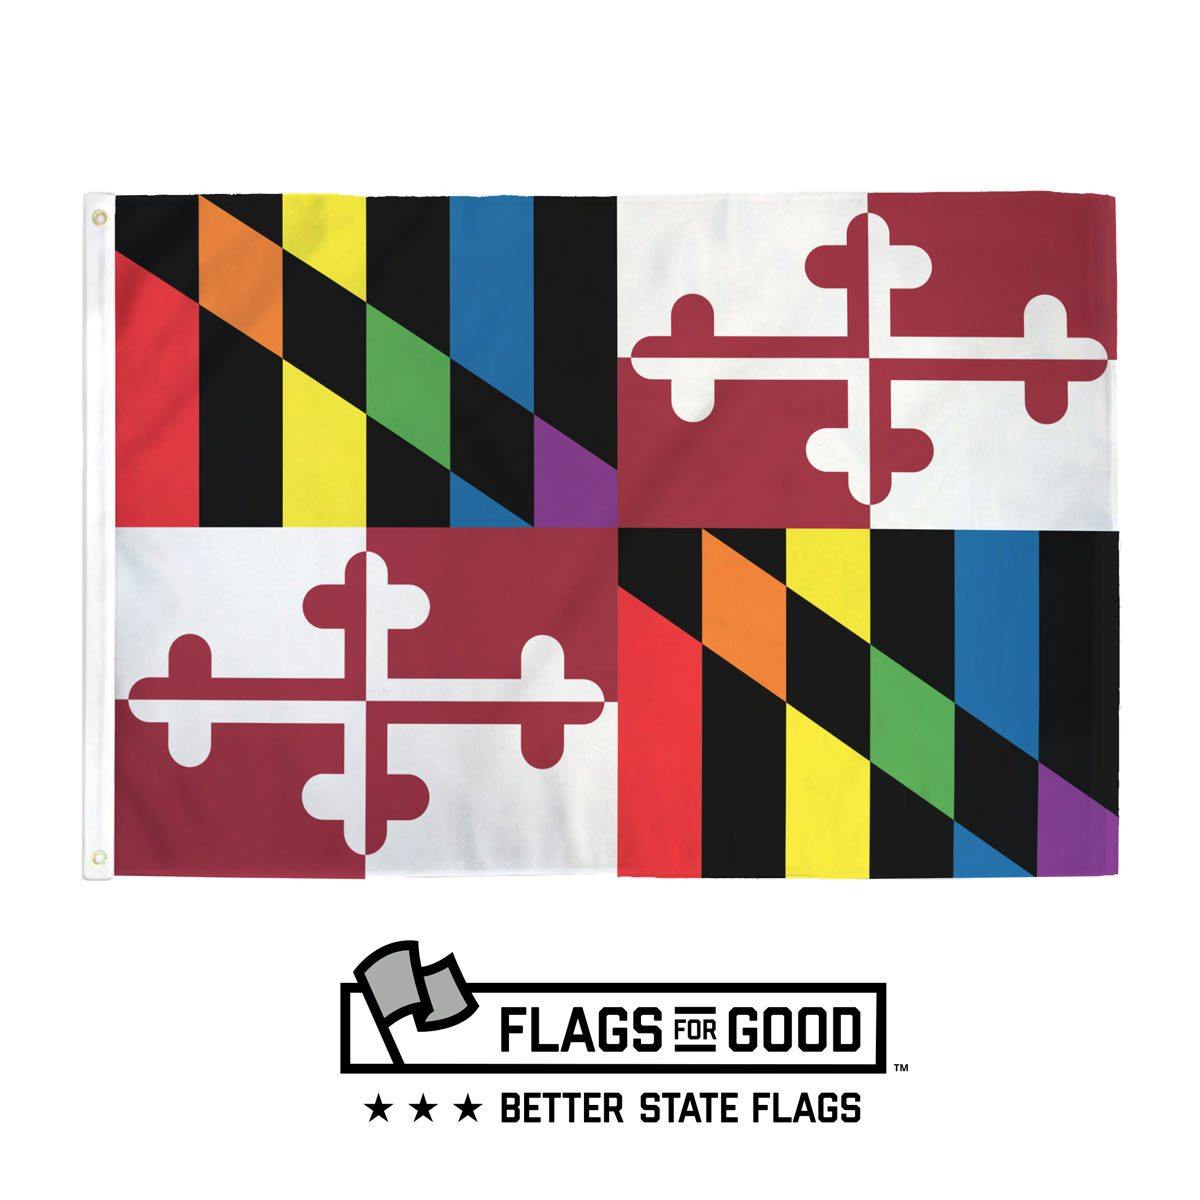 Rainbow Maryland State Flag by Flags for Good (L) 3ft x 4.5ft Single-Sided with Grommets